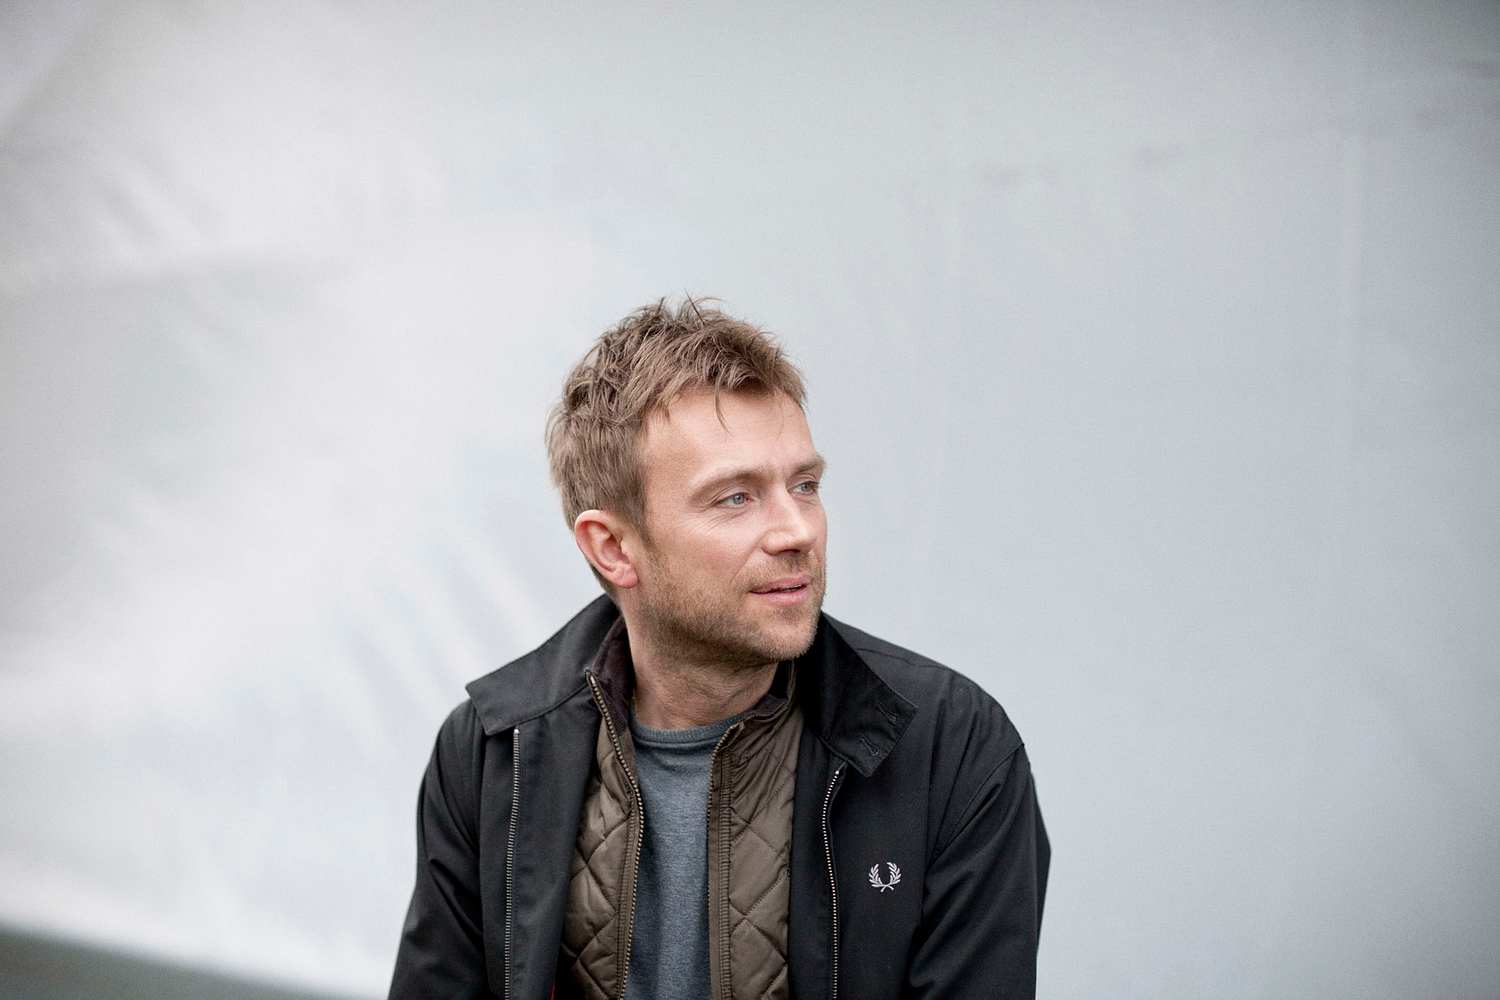 Damon Albarn clears up the Adele kerfuffle: “She just came in and had a cup of tea”